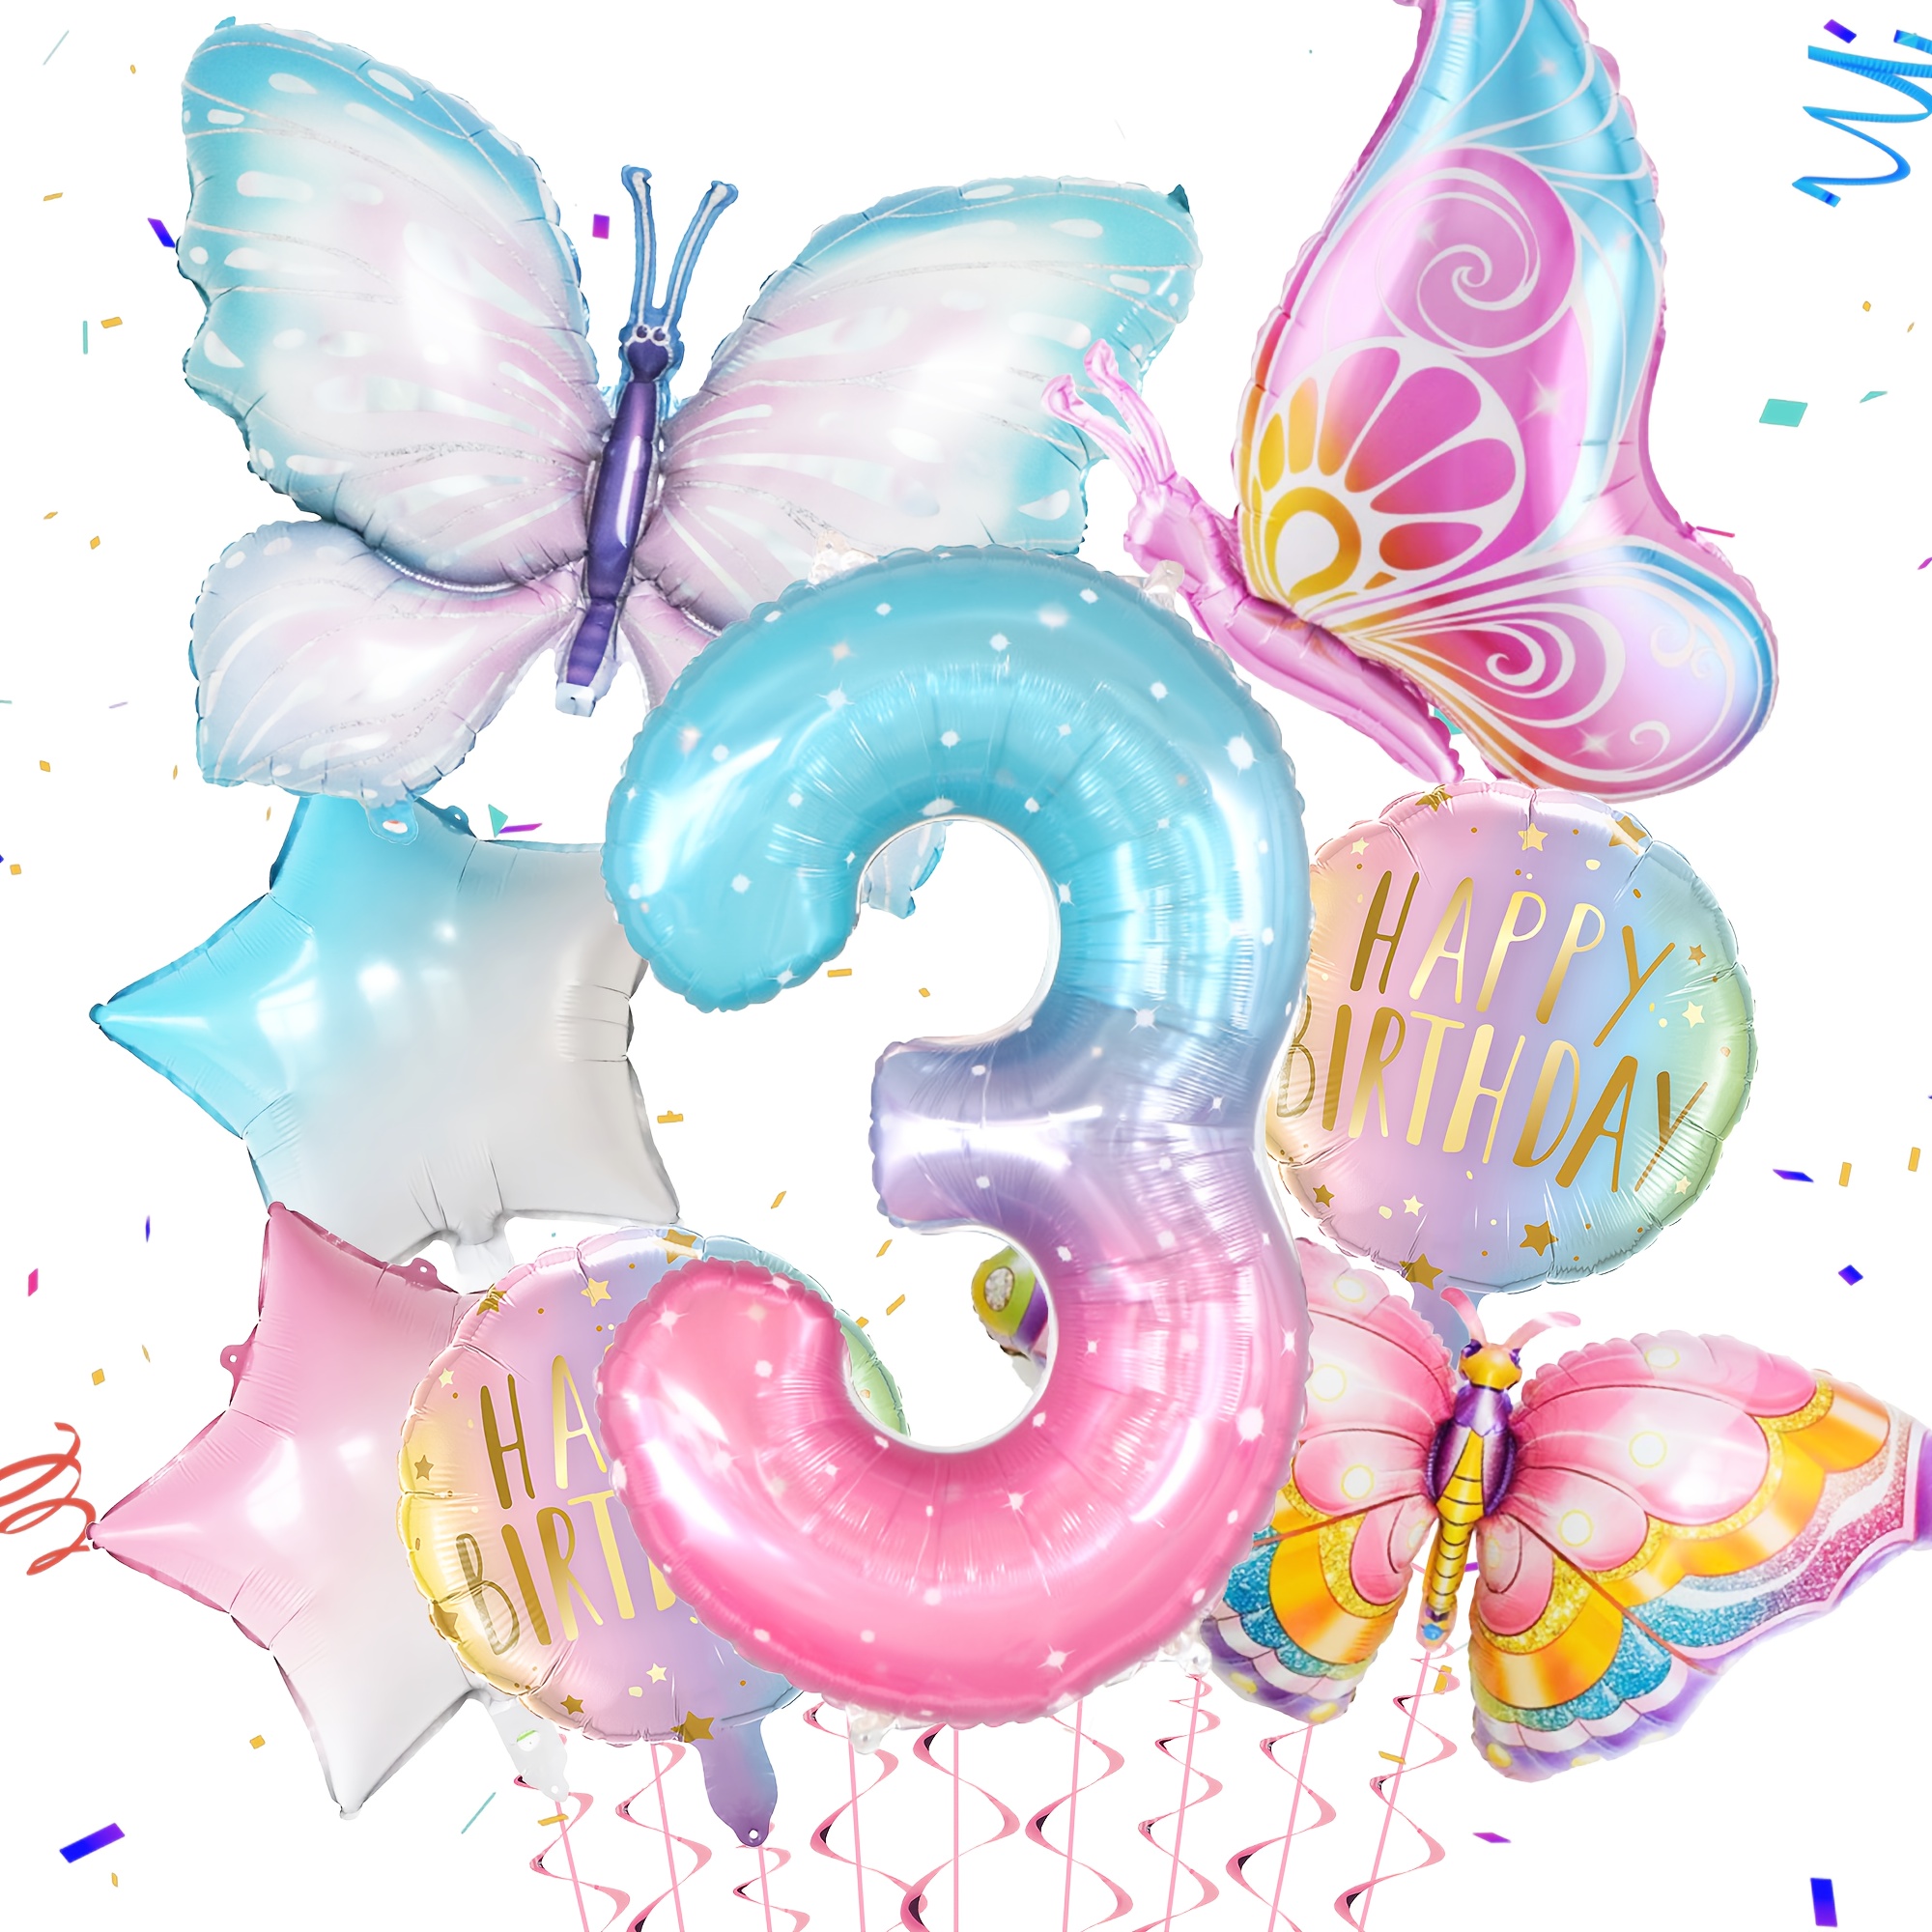 

8pcs, Butterfly Number Balloon Set, Birthday Party Decor, Anniversary Decor, Holiday Decor, Home Decor, Classroom Decor, Atmosphere Background Layout, Indoor Outdoor Decor